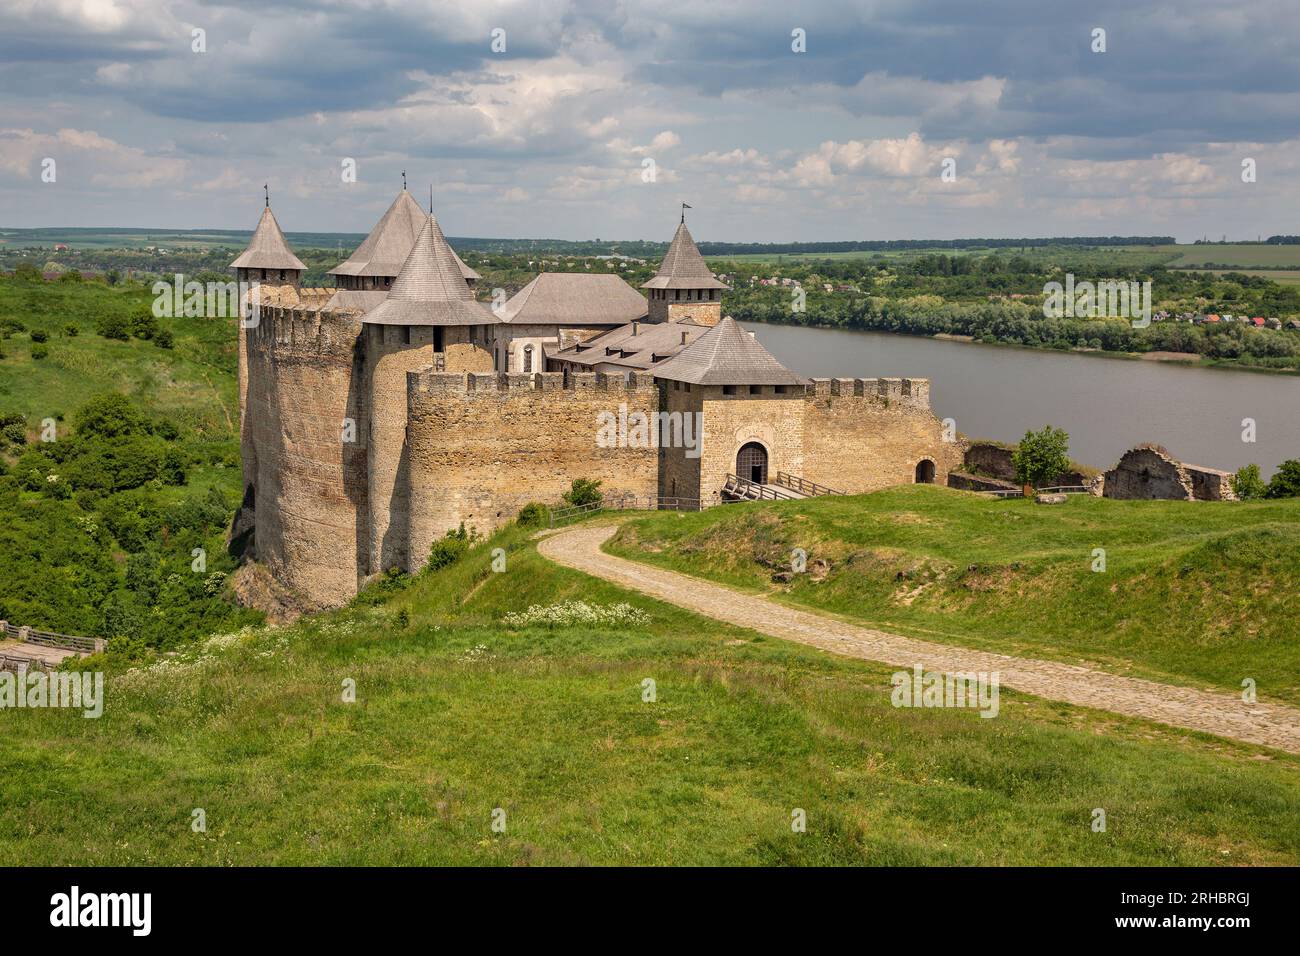 Khotyn Fortress and river Dniester. It is a medieval fortification complex in Ukraine. Stock Photo